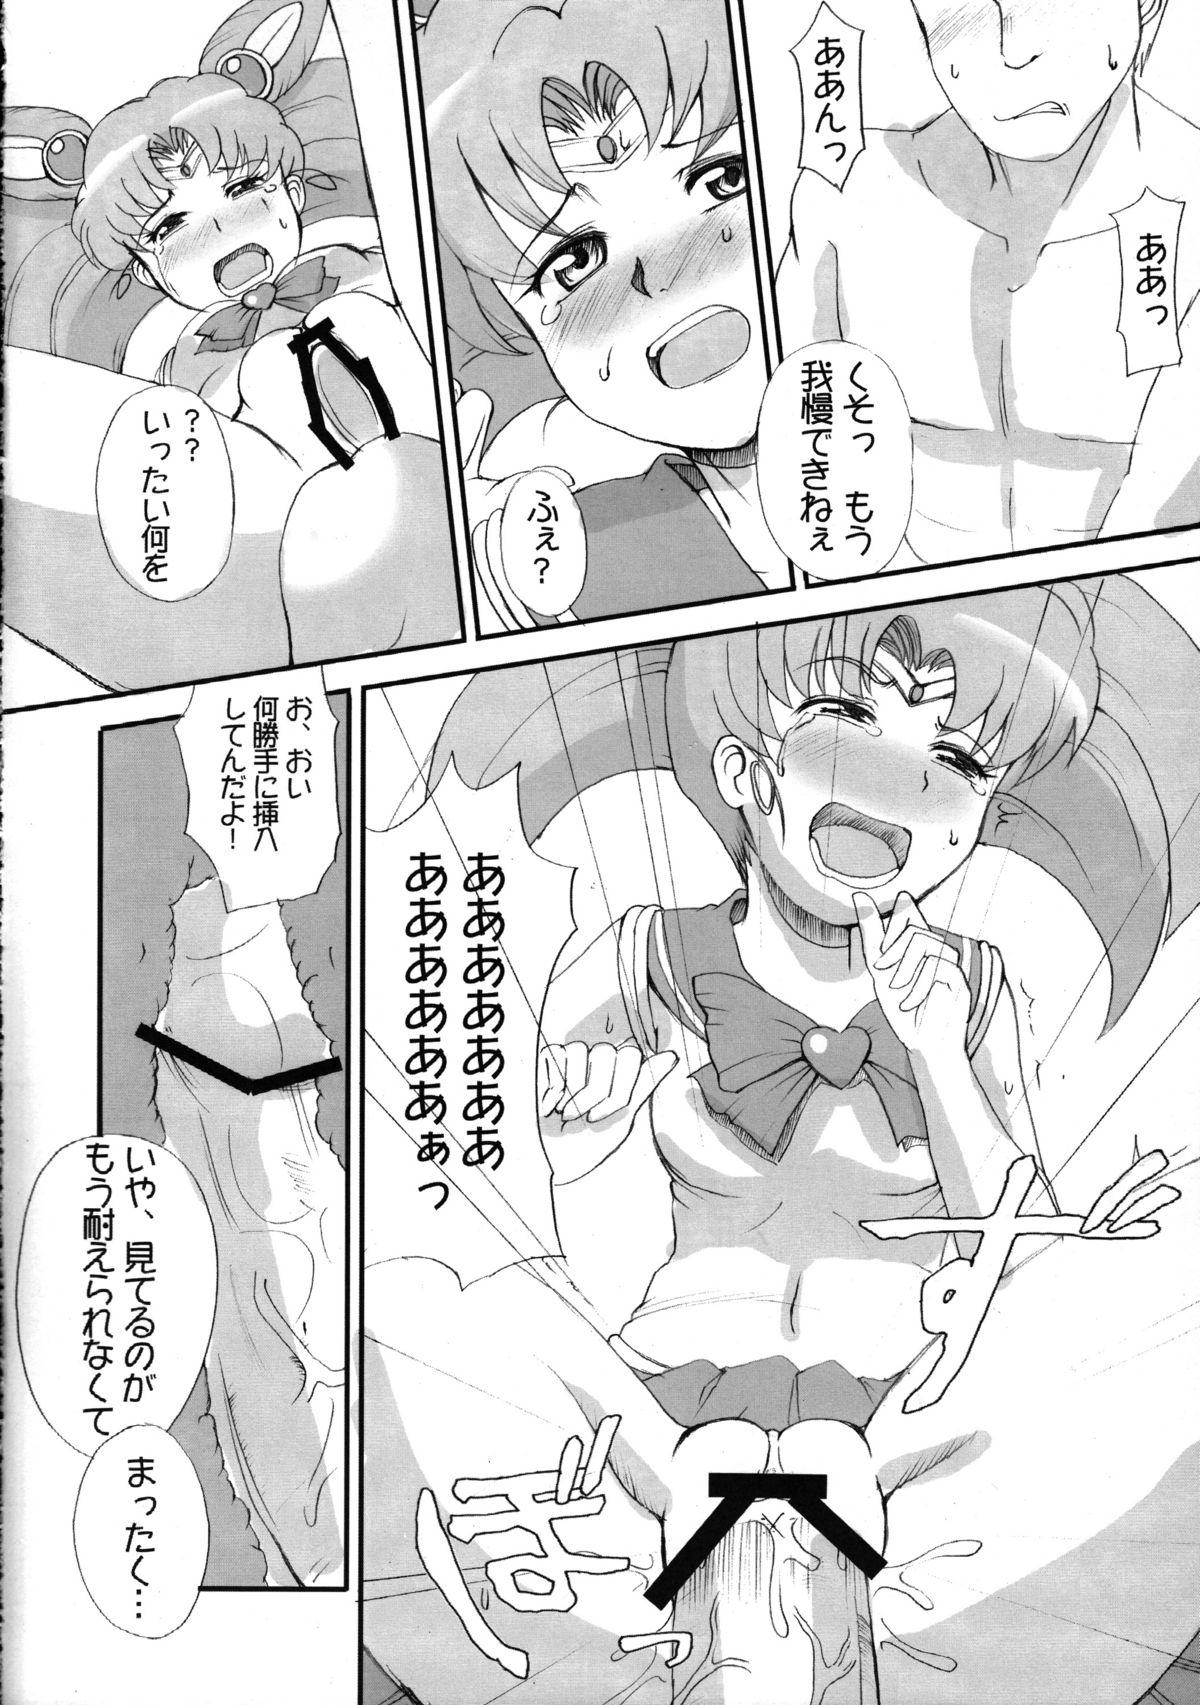 Adult Toys The Iron Cage - Sailor moon Babe - Page 7